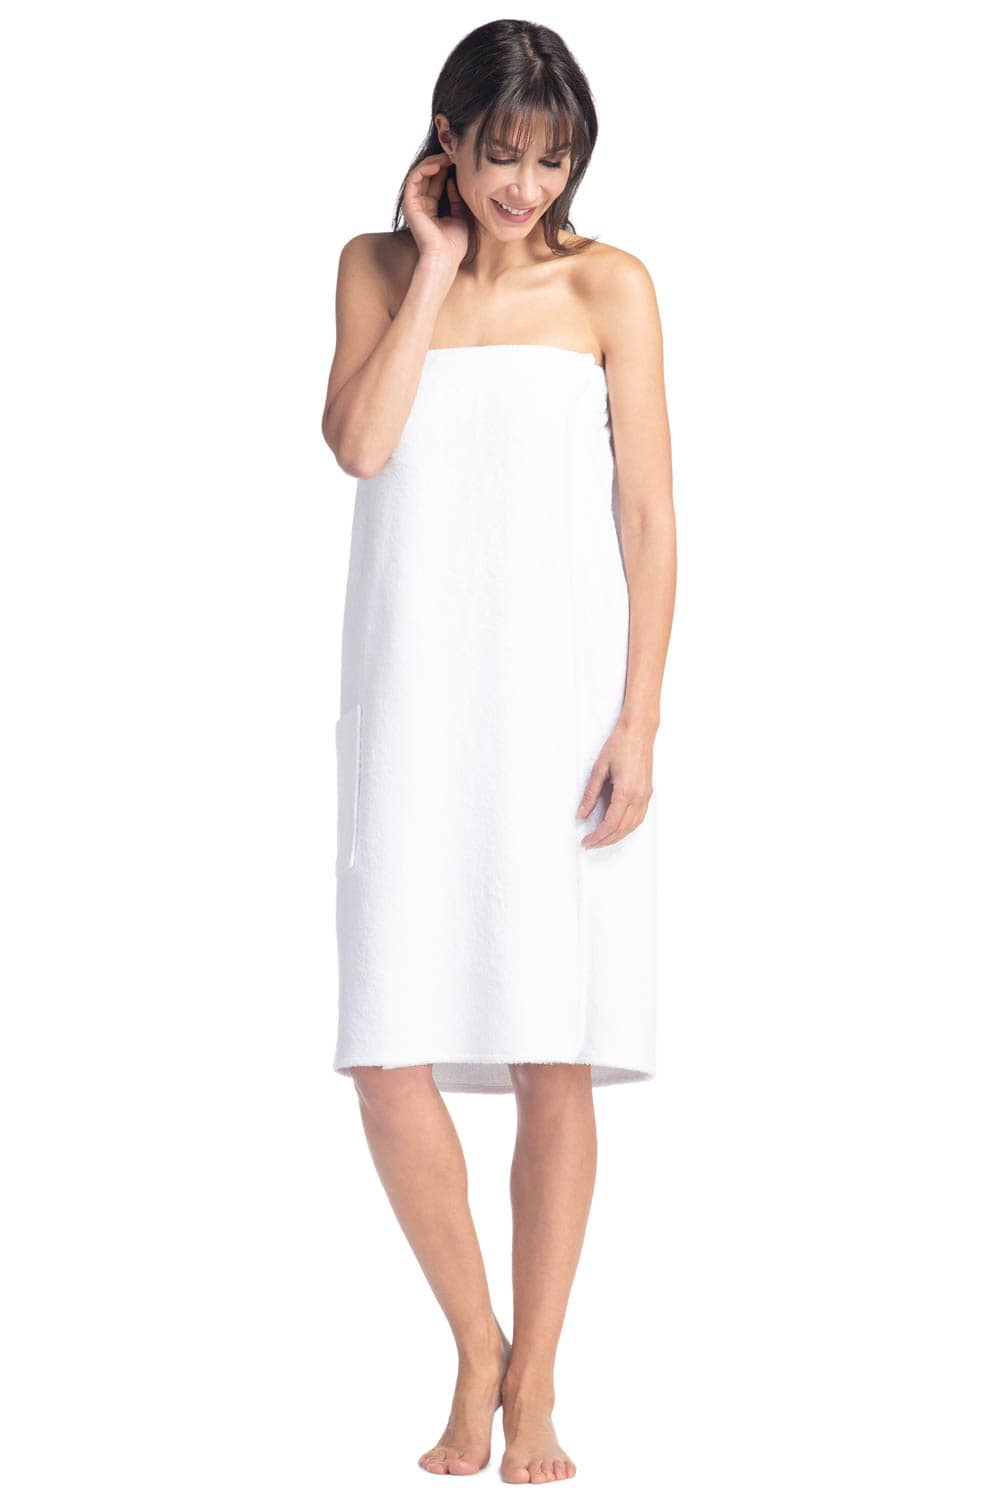 Women's Resort Style Terry Cloth Spa Wrap Womens>Spa>Wrap Fishers Finery White One-Size 